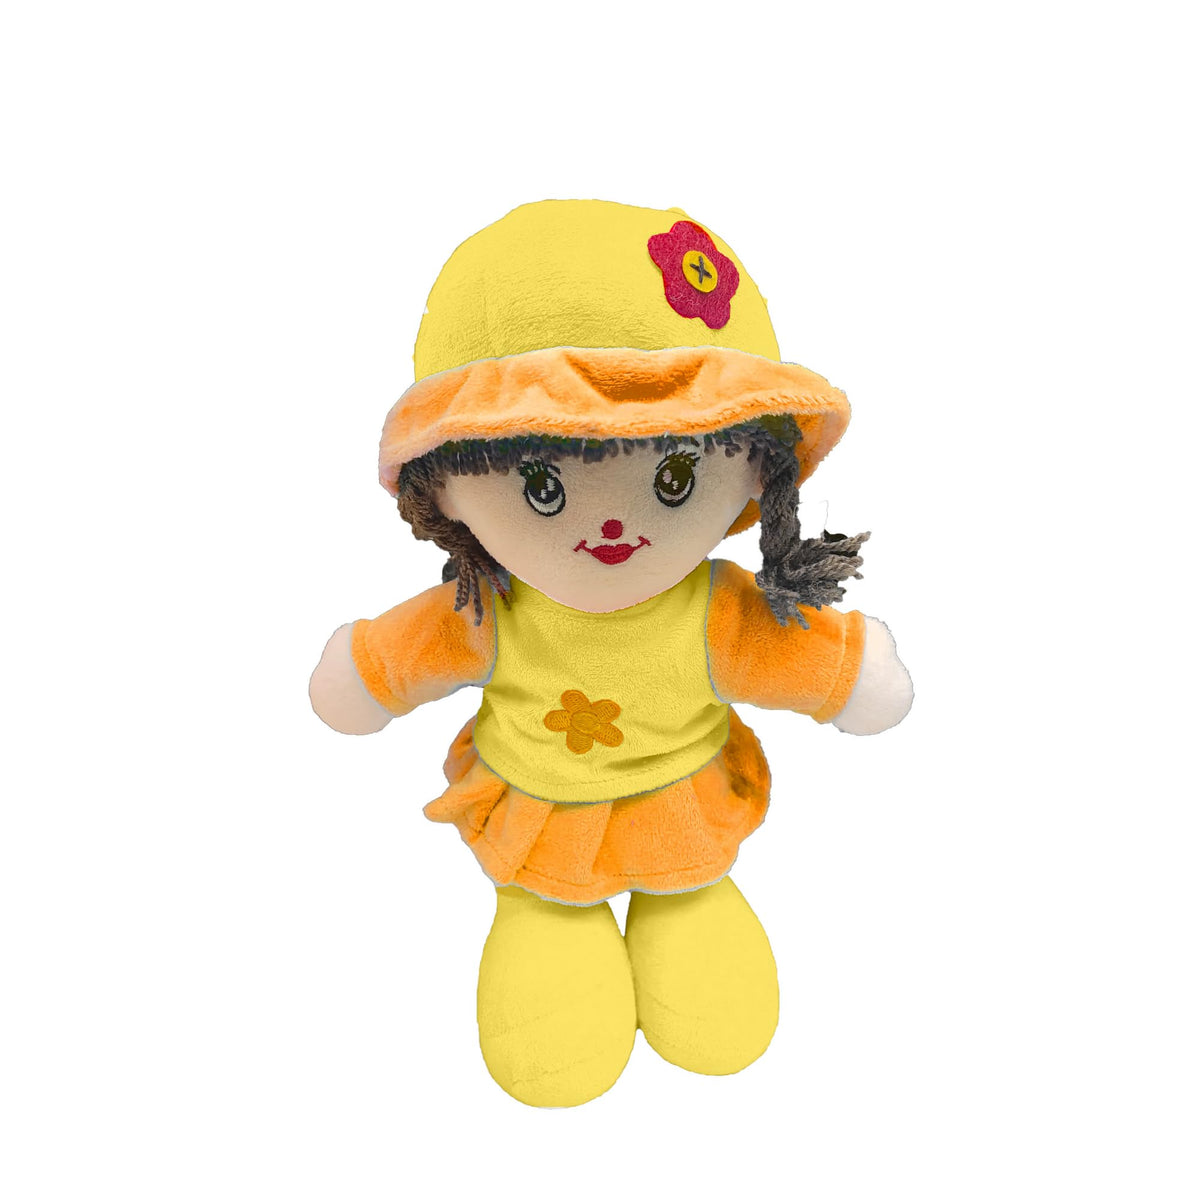 Addie Girl Rag Doll for Kids 35cm, Huggable & Adorable Plush for Toddler, Baby Doll with Hat & Skirt for Girls | Soft & Cuddly Stuffed Toy for Babies | Made in India (Yellow)